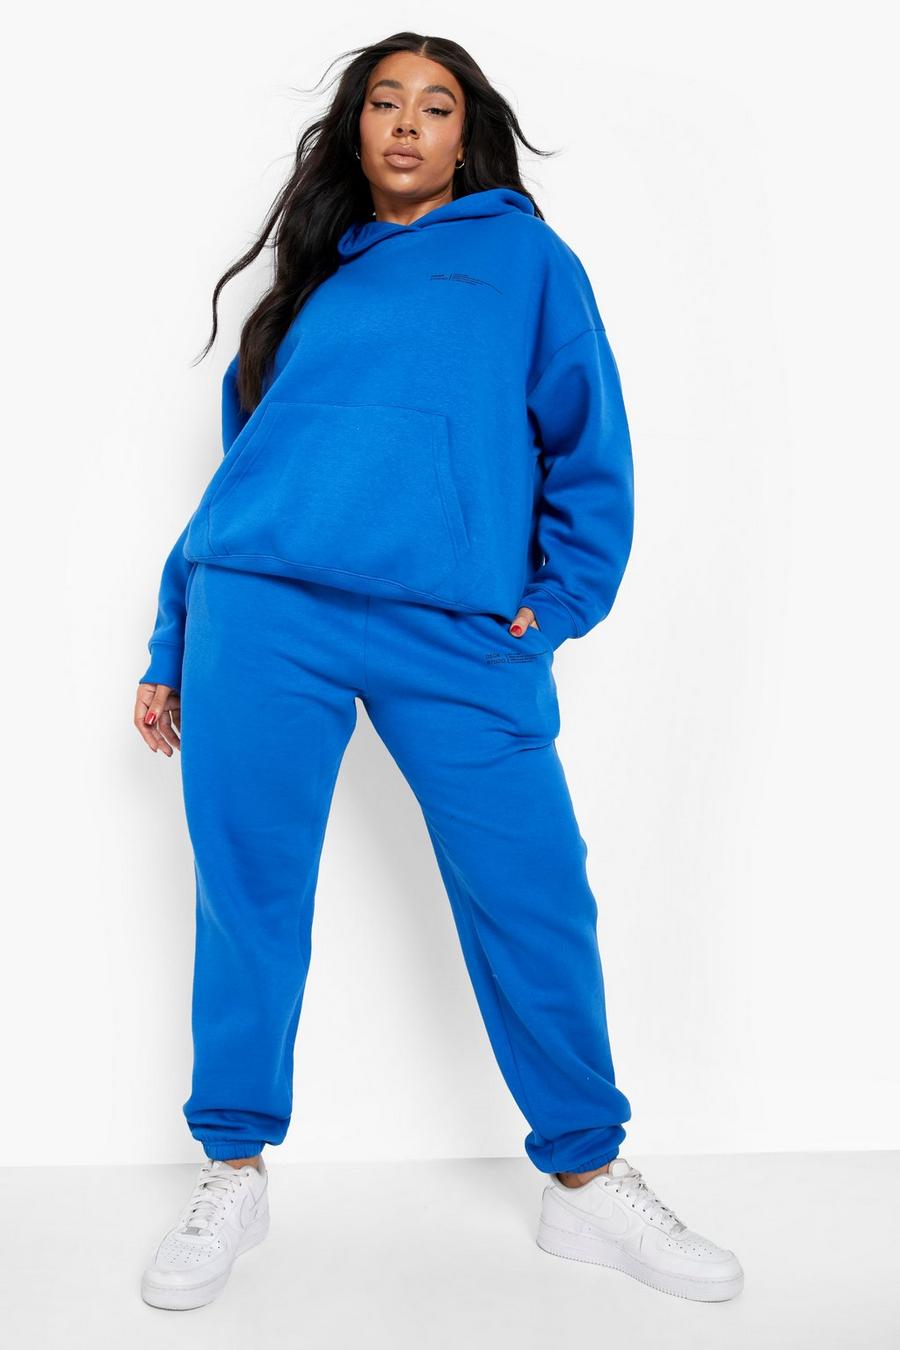 Will hunt Previously Women's Plus Official Text Hooded Tracksuit | Boohoo UK